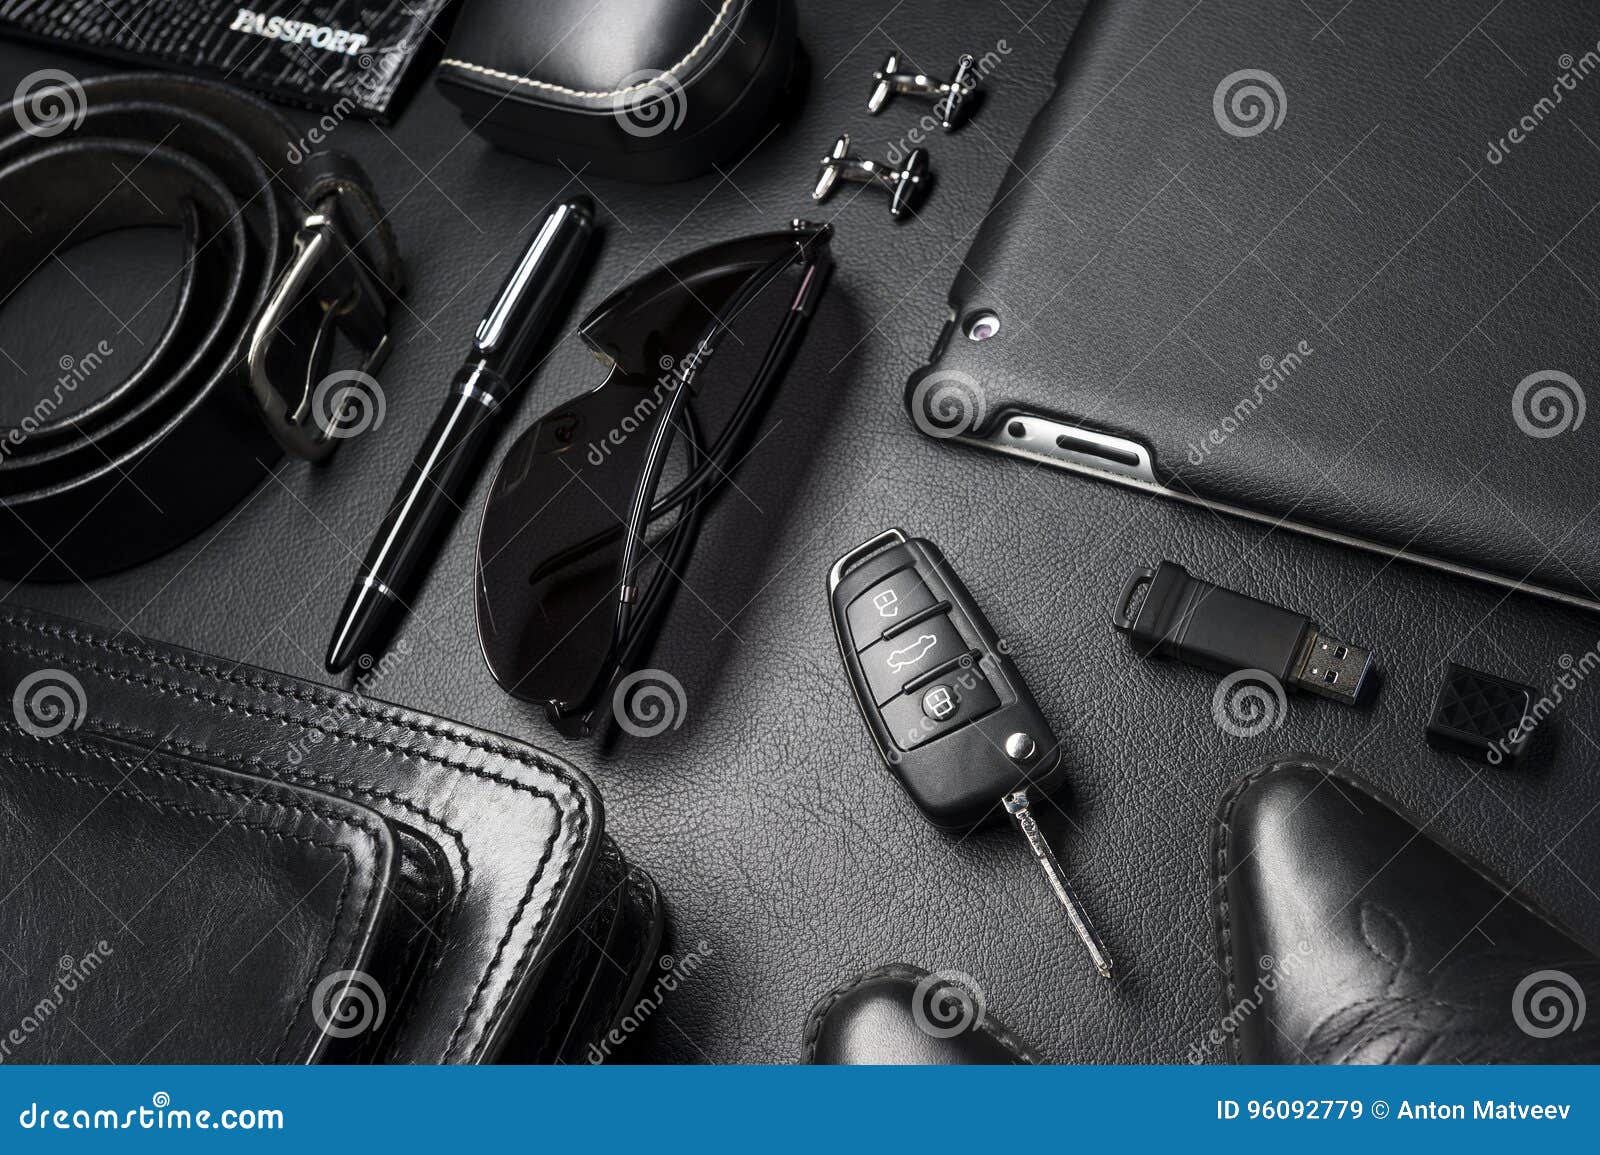 https://thumbs.dreamstime.com/z/business-man-accessories-style-gadgets-clothes-shoes-jewelry-other-luxury-businessman-objects-leather-black-background-96092779.jpg